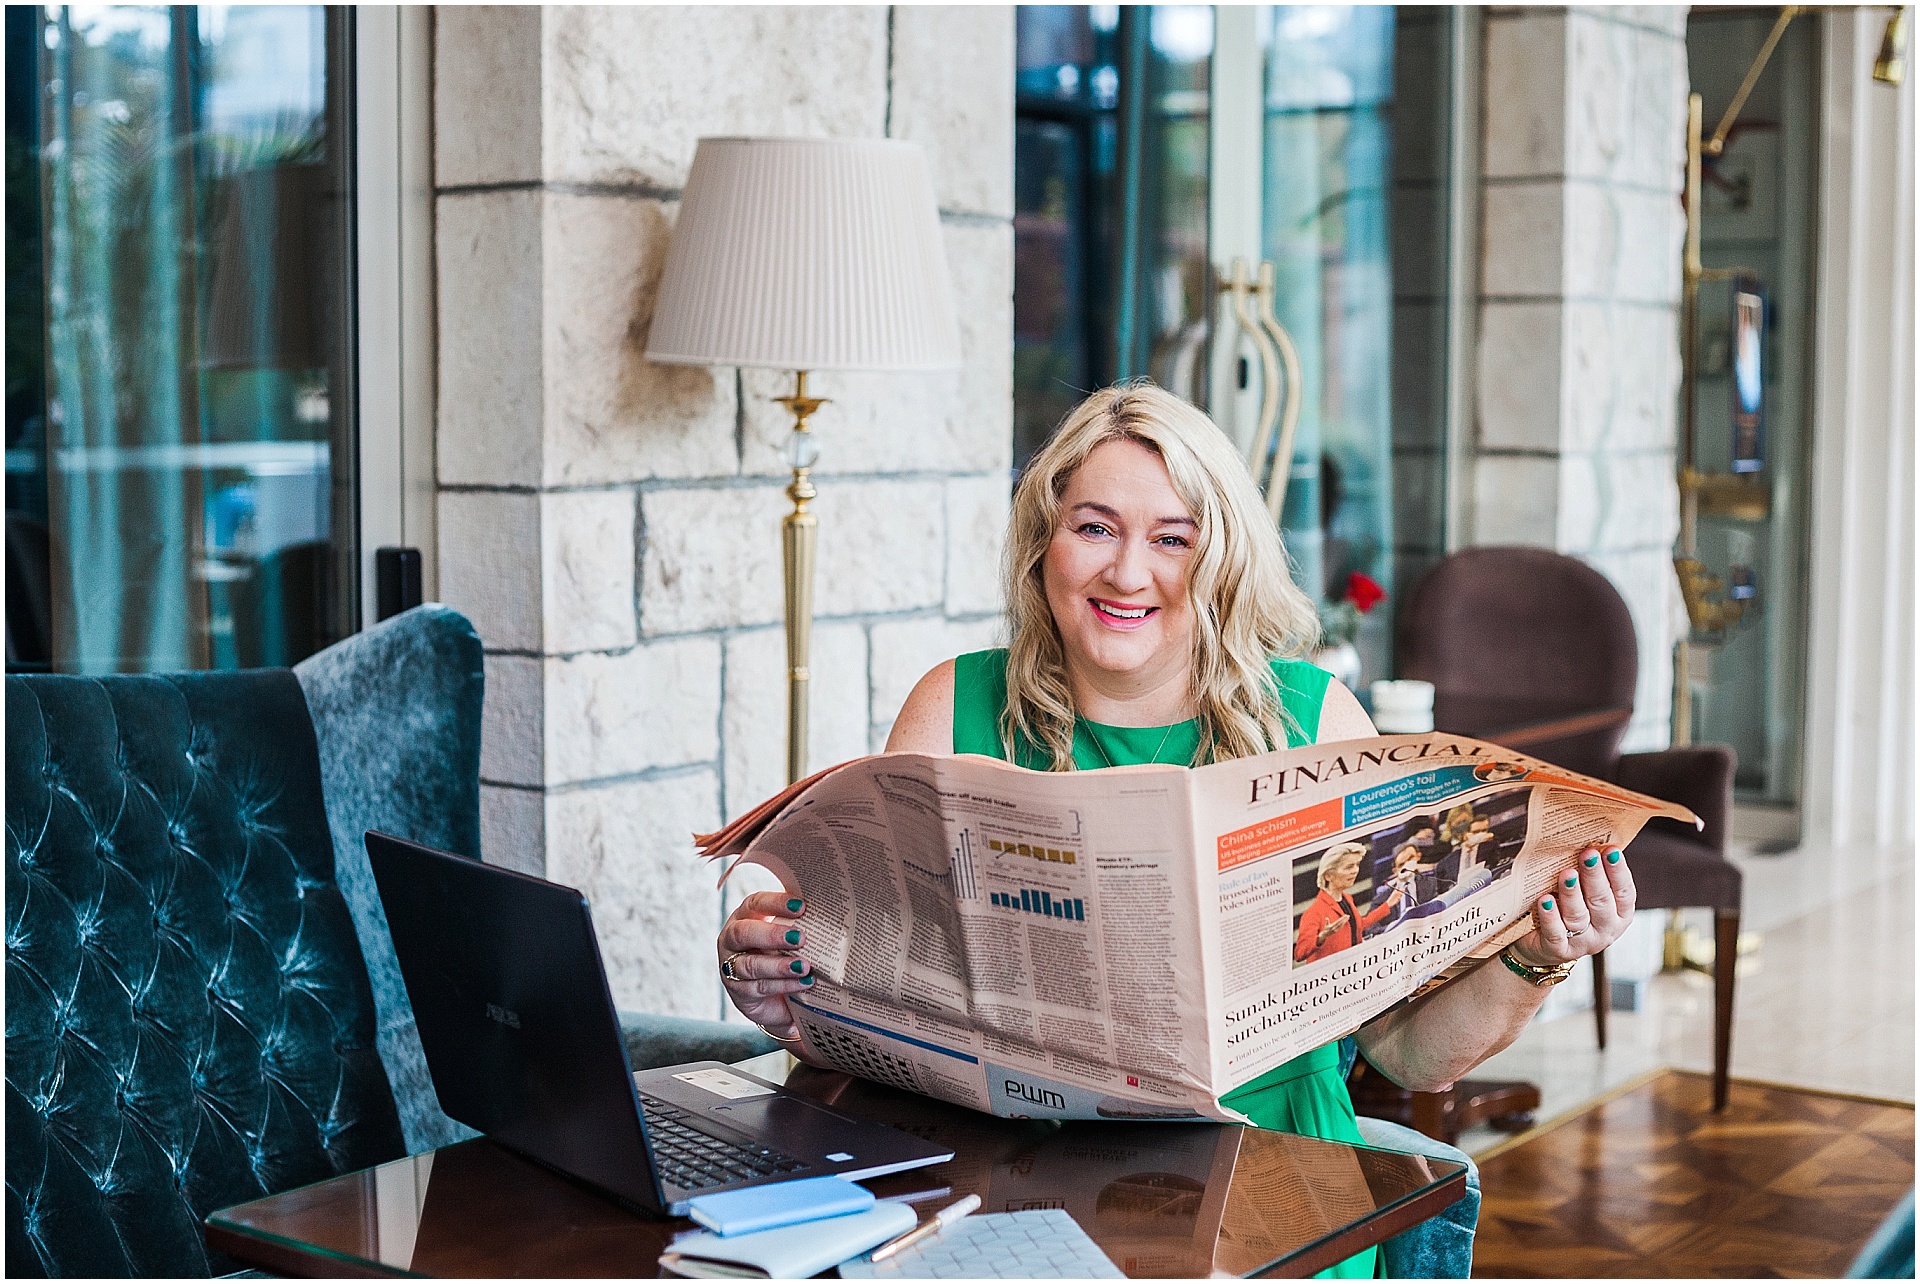 Croatia brand shoot of corporate strategist Carol Deveney. She is smiling at the camera whilst reading a newspaper sat at a table. She is wearing a green dress and has shoulder length blonde hair. Image by destination brand photographer AKP Branding Stories